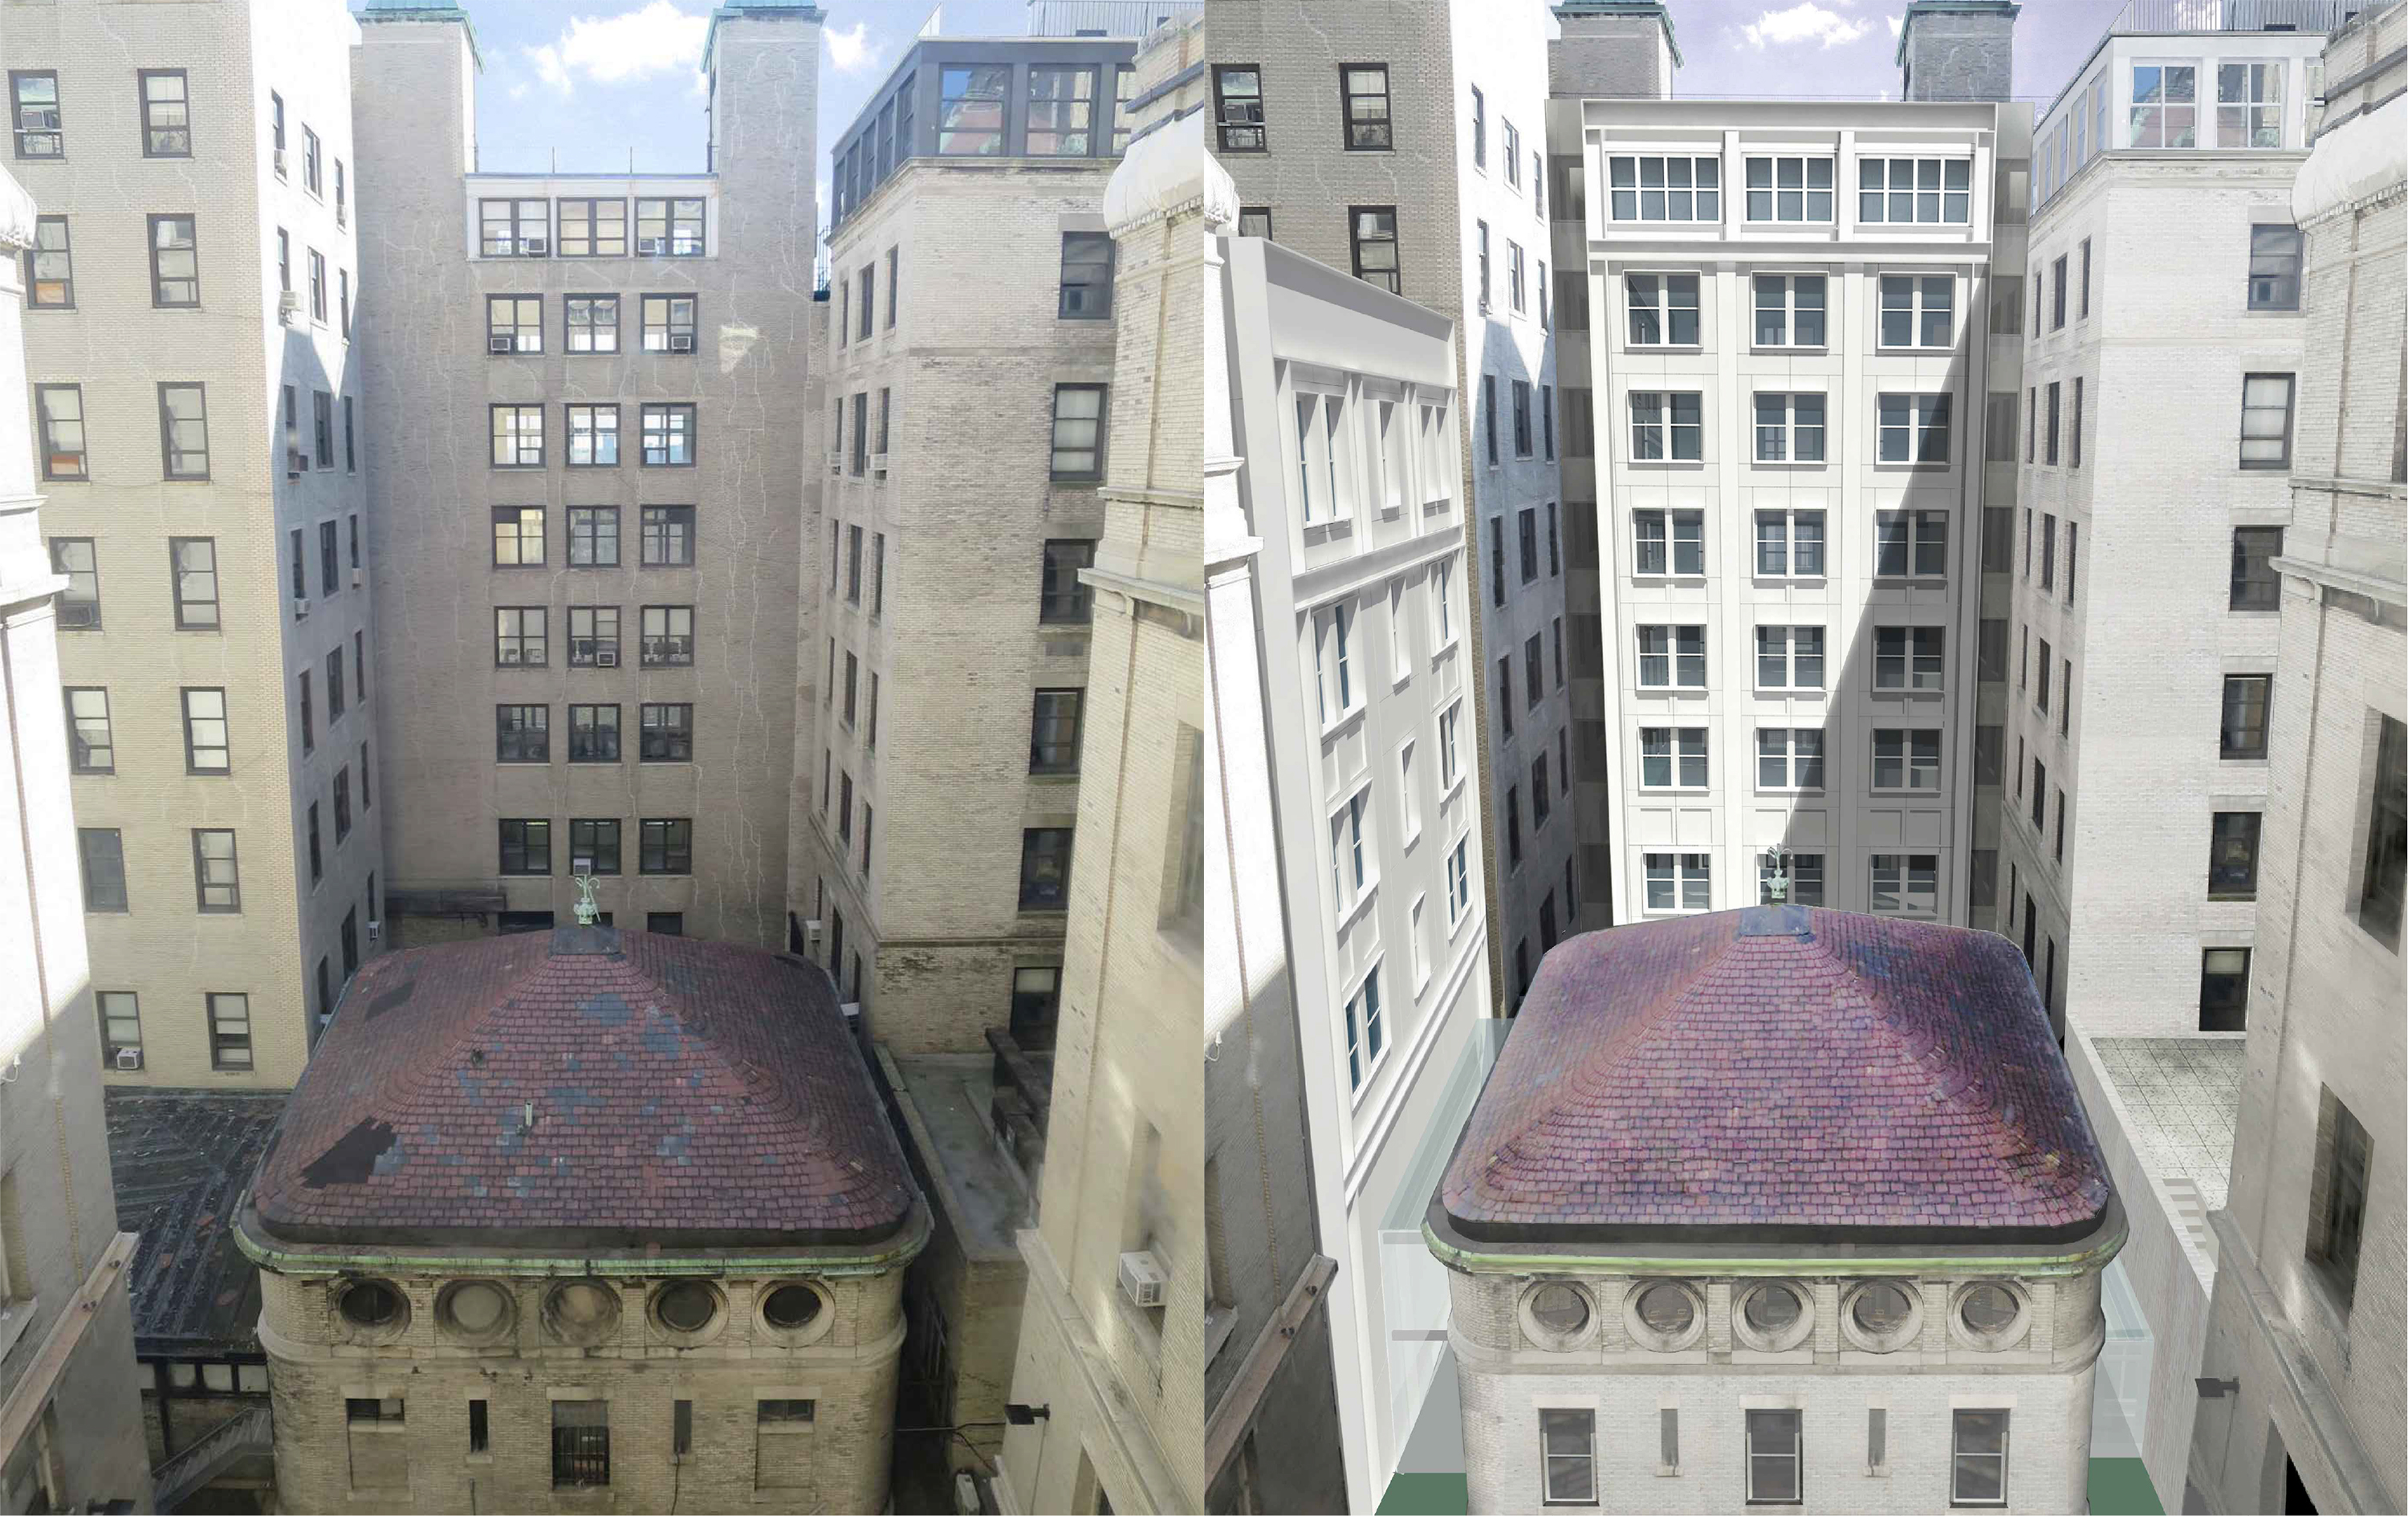 Existing conditions of interior courtyard and carriage house at 30 Morningside Drive (left) and rendering showing restored carriage house and infill between the Scrymser and Plant pavilions